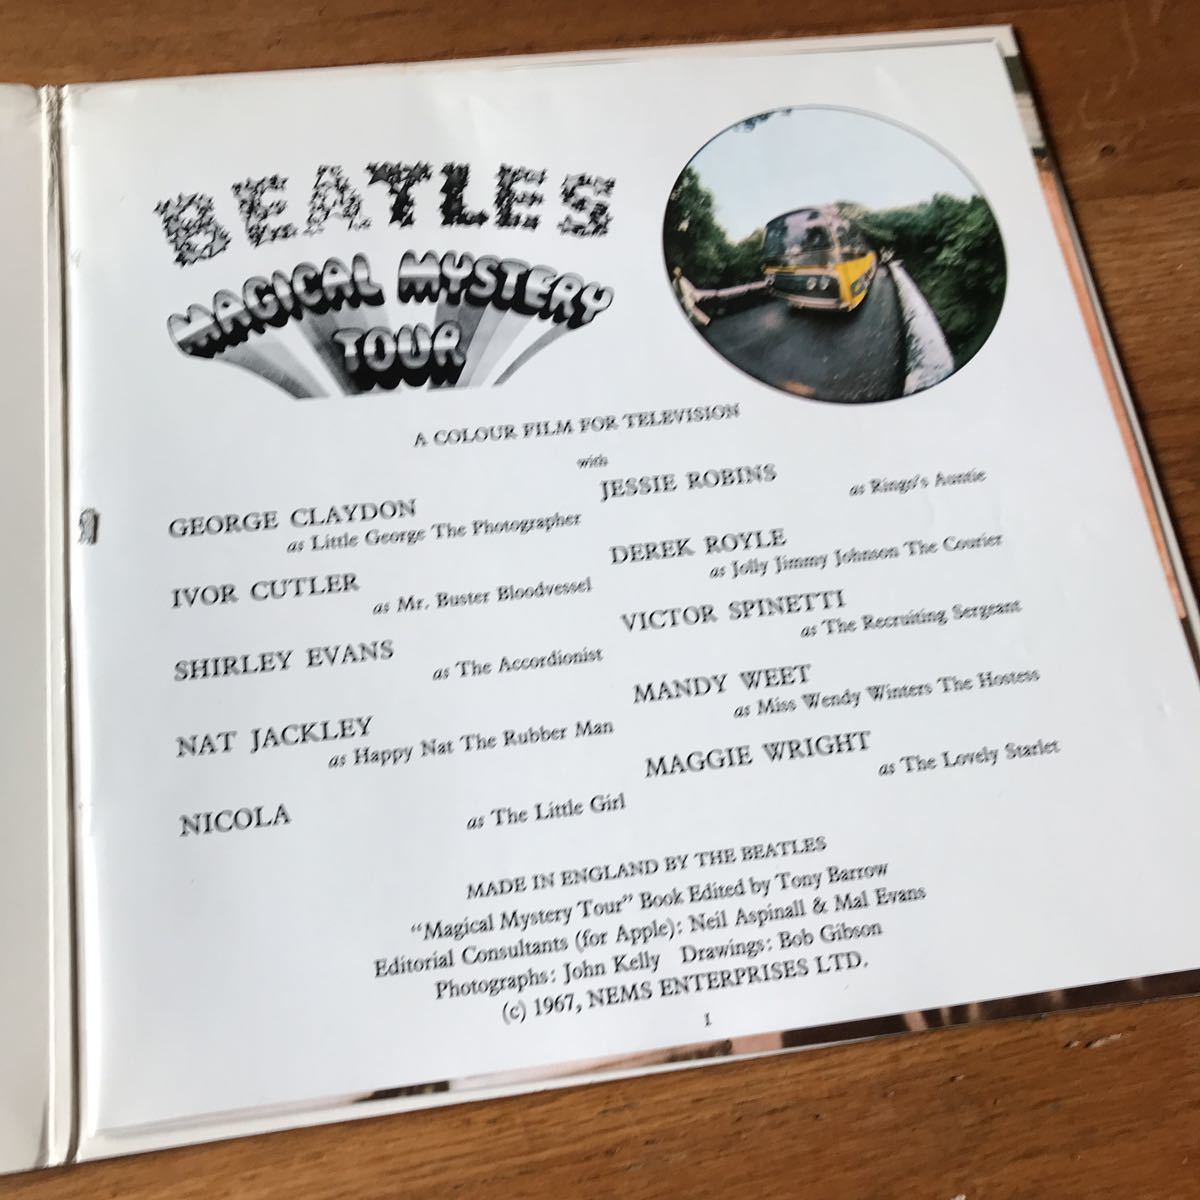 THE BEATLES Beatles magical mystery Tour record Magical MYSTERY TOUR America record us record 